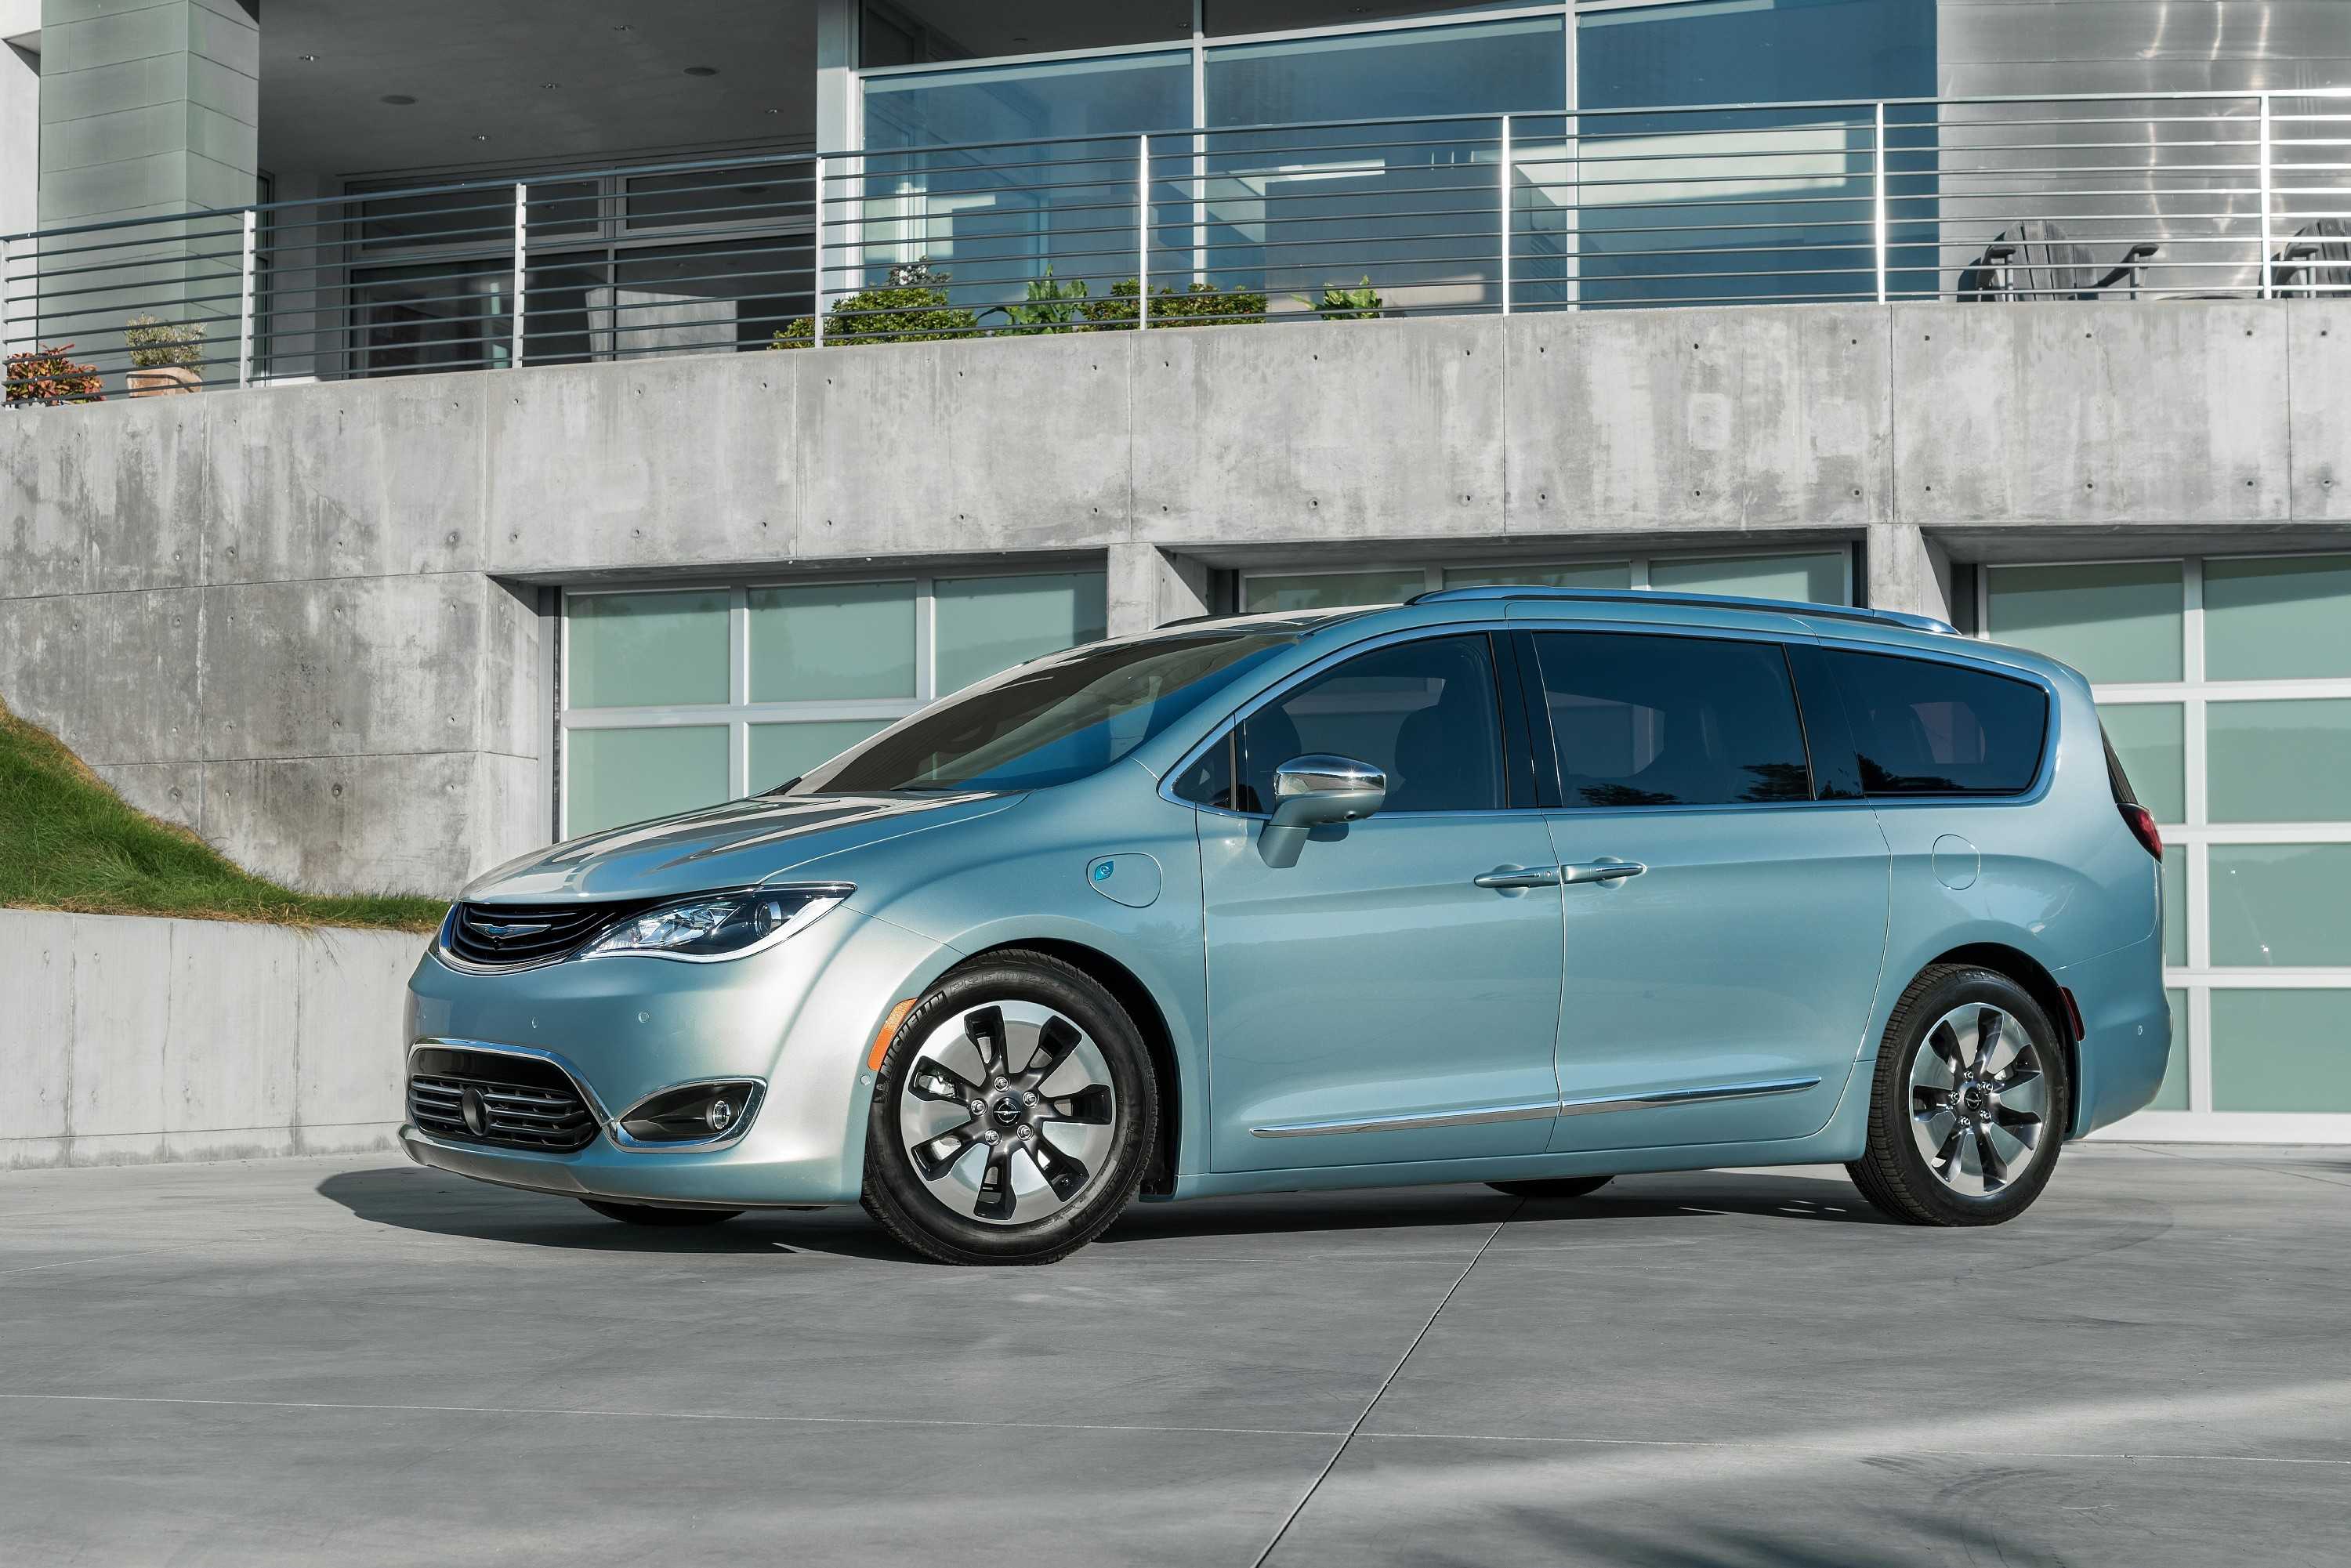 Google and Fiat are working on self-driving minivans.